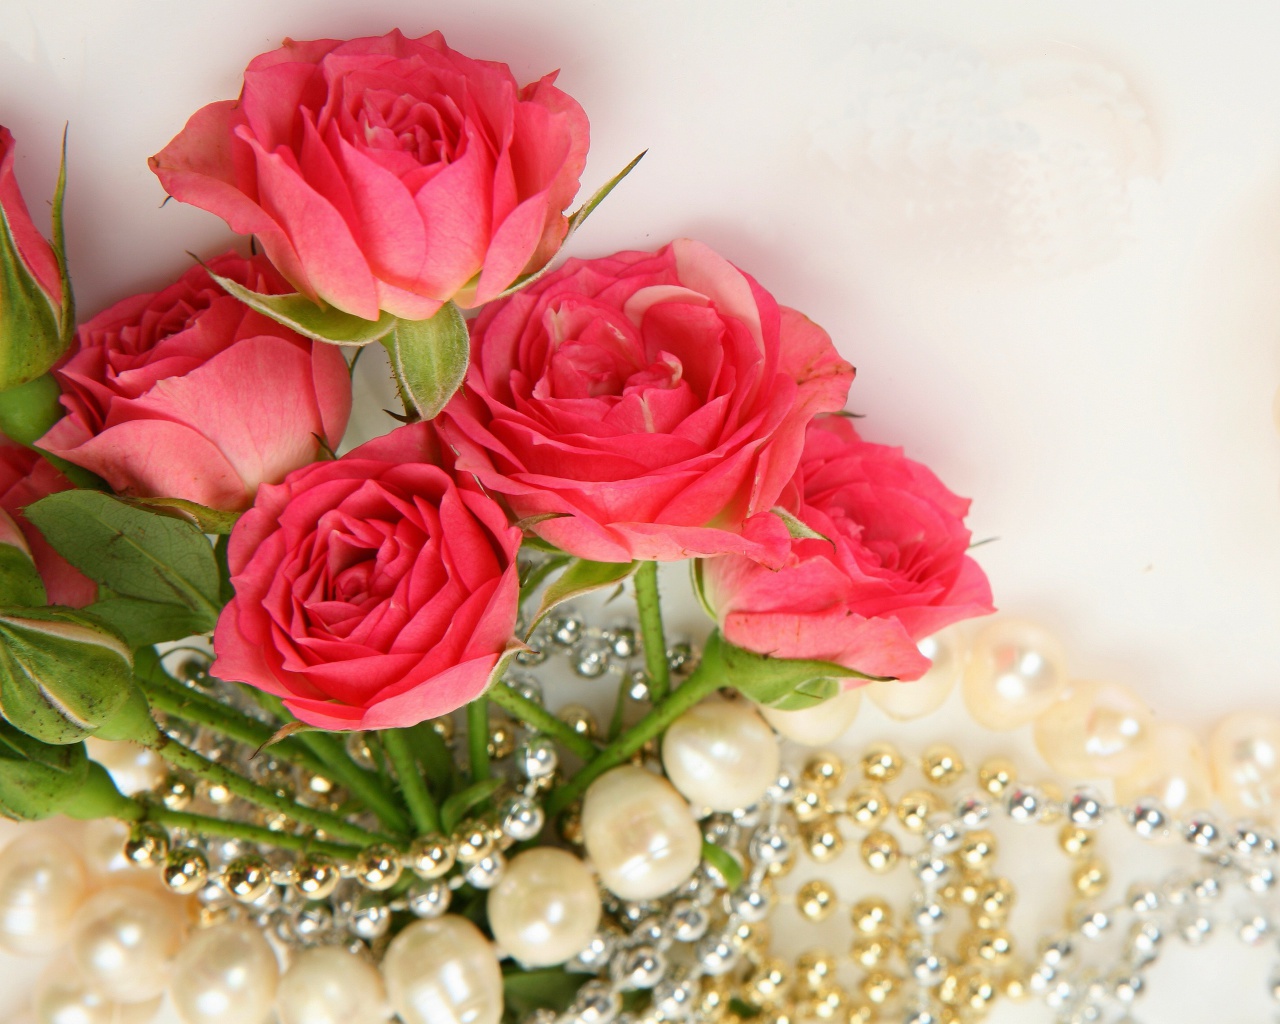 Necklace and Roses Bouquet wallpaper 1280x1024